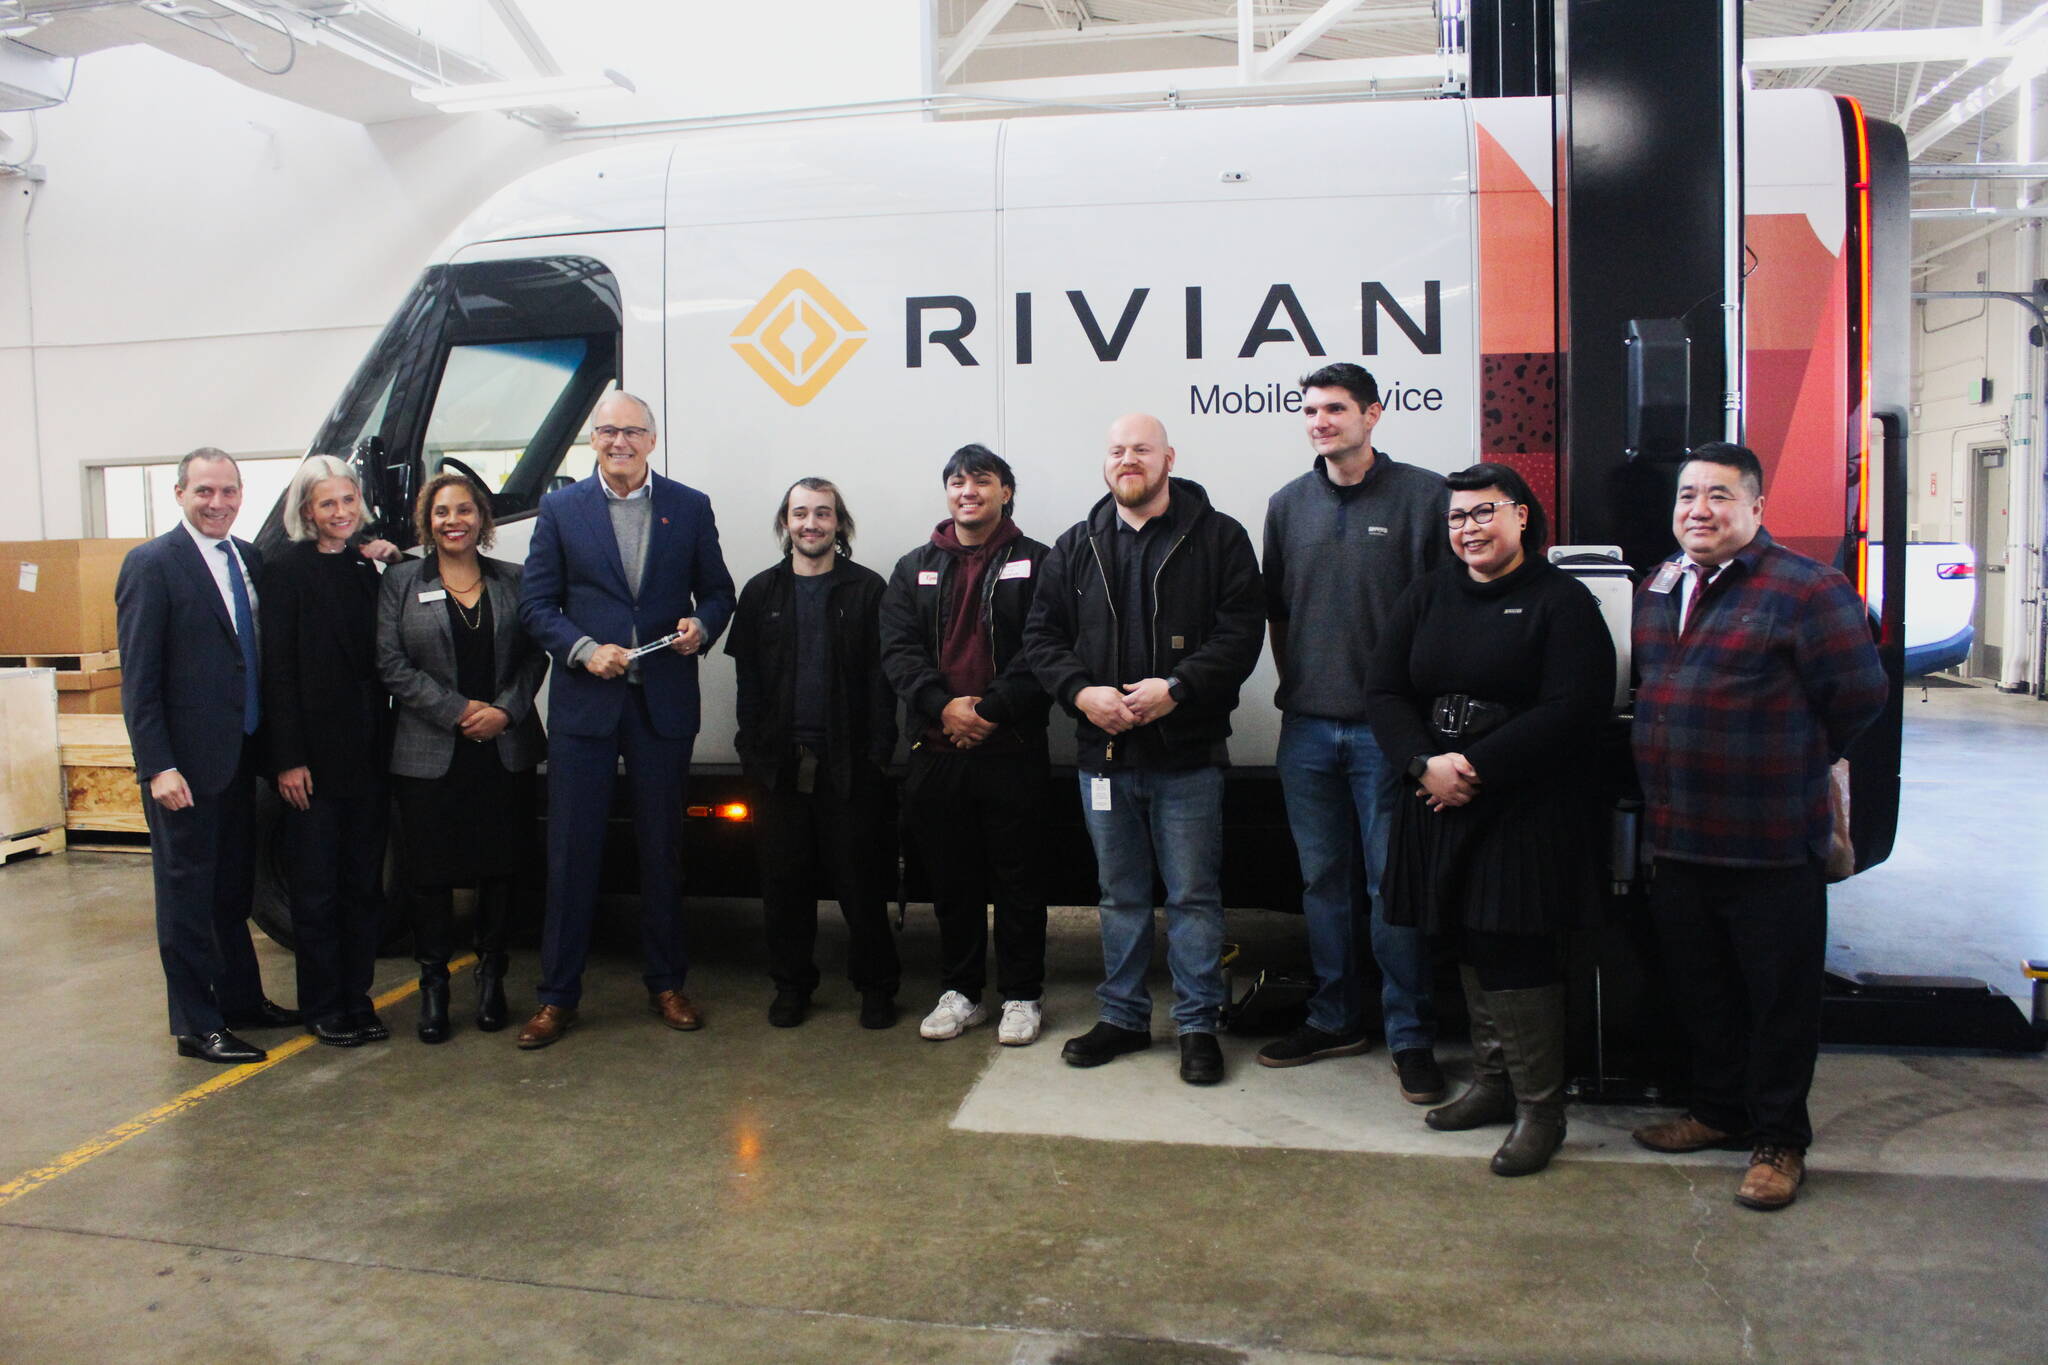 Gov. Jay Inslee, along with Rivian associates, RTC staff and RTC students in front of a Rivian mobile service vehicle after the governor toured the new program space. Photo by Bailey Jo Josie/Sound Publishing.